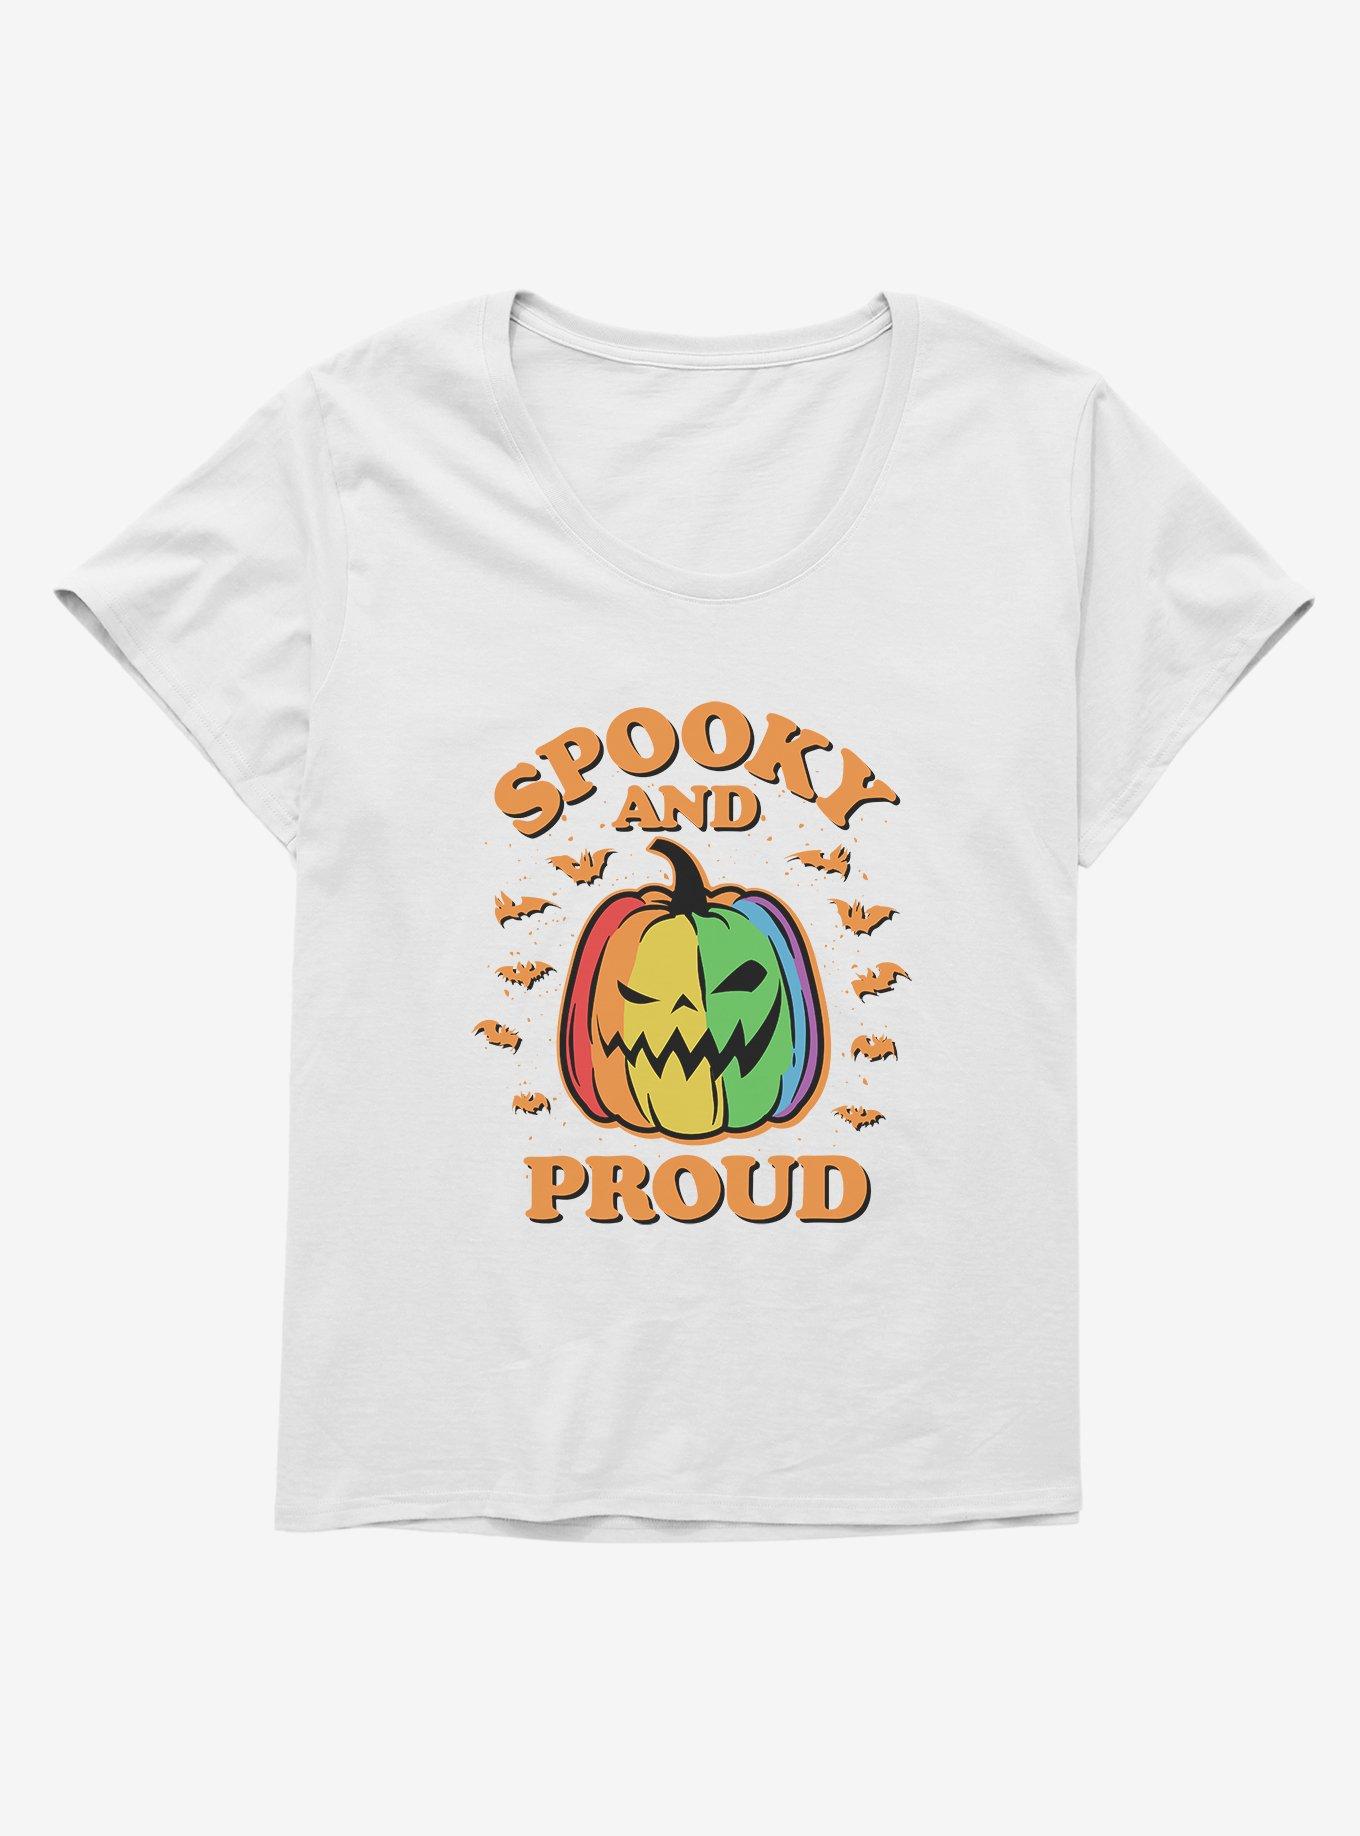 Hot Topic Spooky And Proud Rainbow Jack-O'-Lantern Girls T-Shirt Plus Size, , hi-res